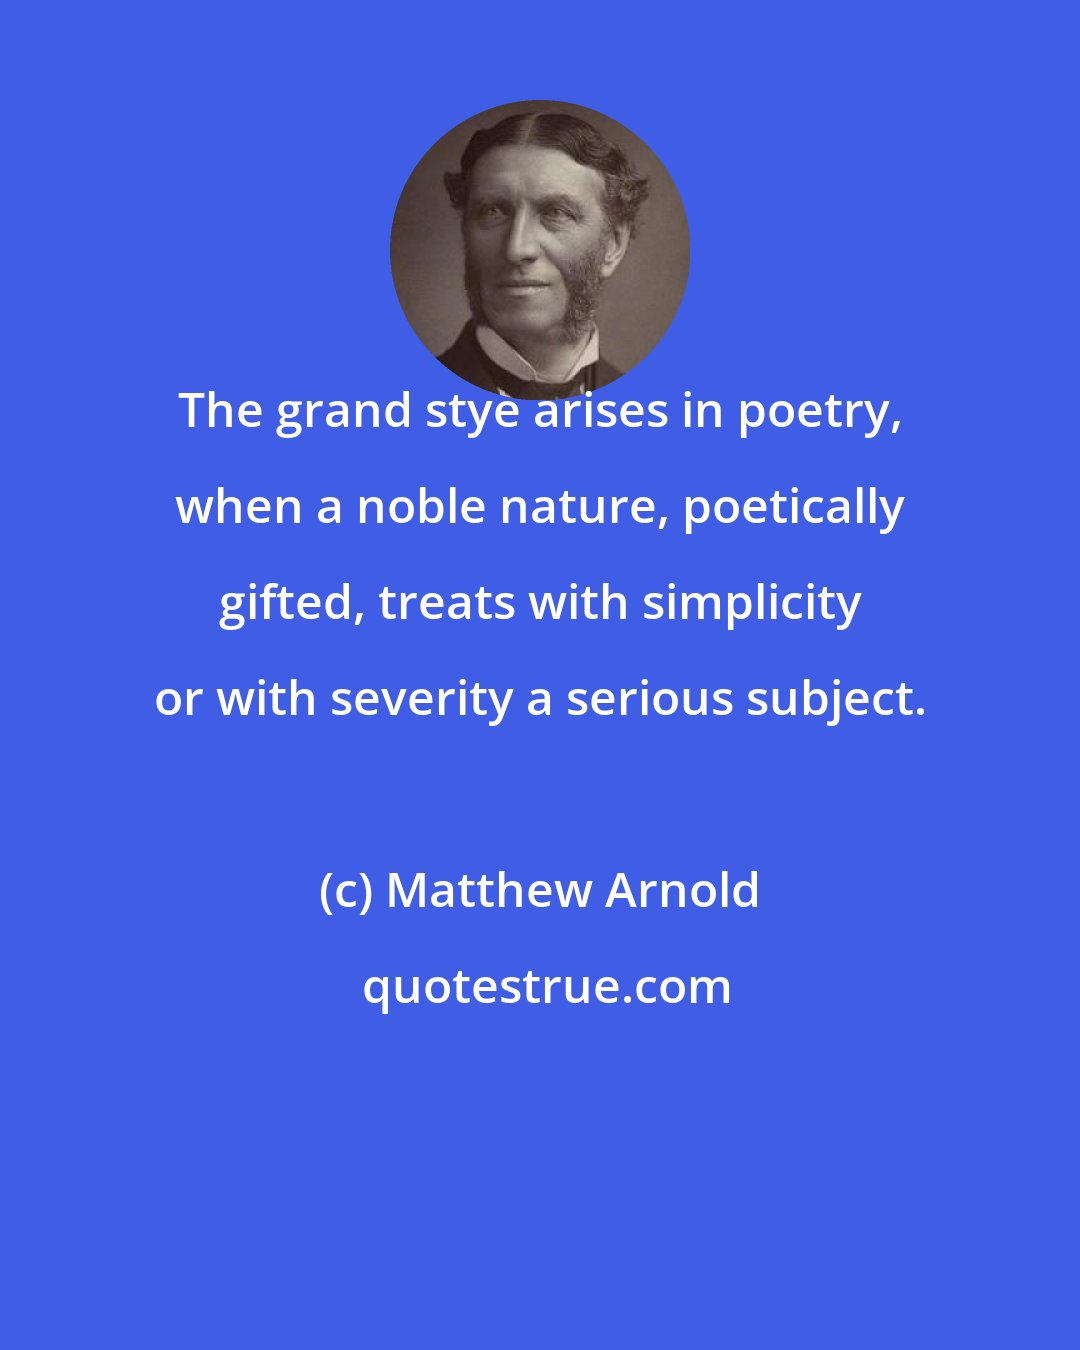 Matthew Arnold: The grand stye arises in poetry, when a noble nature, poetically gifted, treats with simplicity or with severity a serious subject.